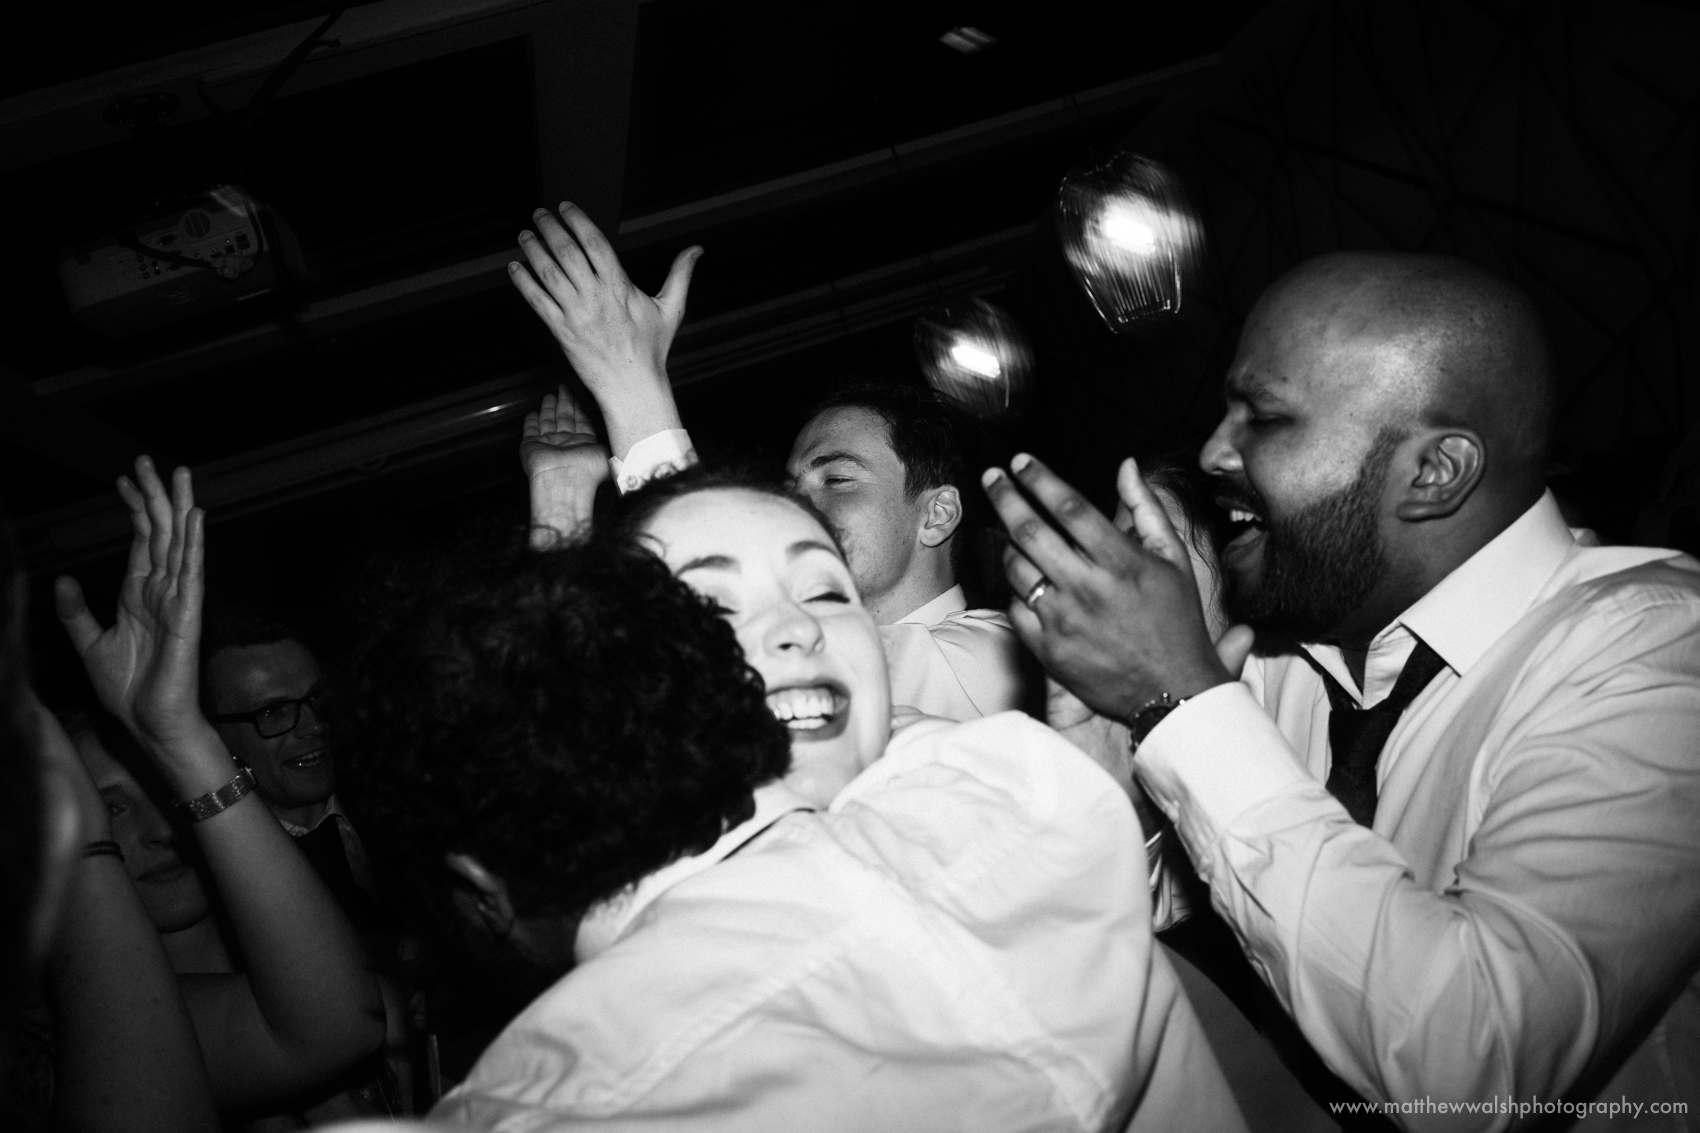 Guests dancing and hugging at an alternative wedding reception at the Living room in Central Manchester